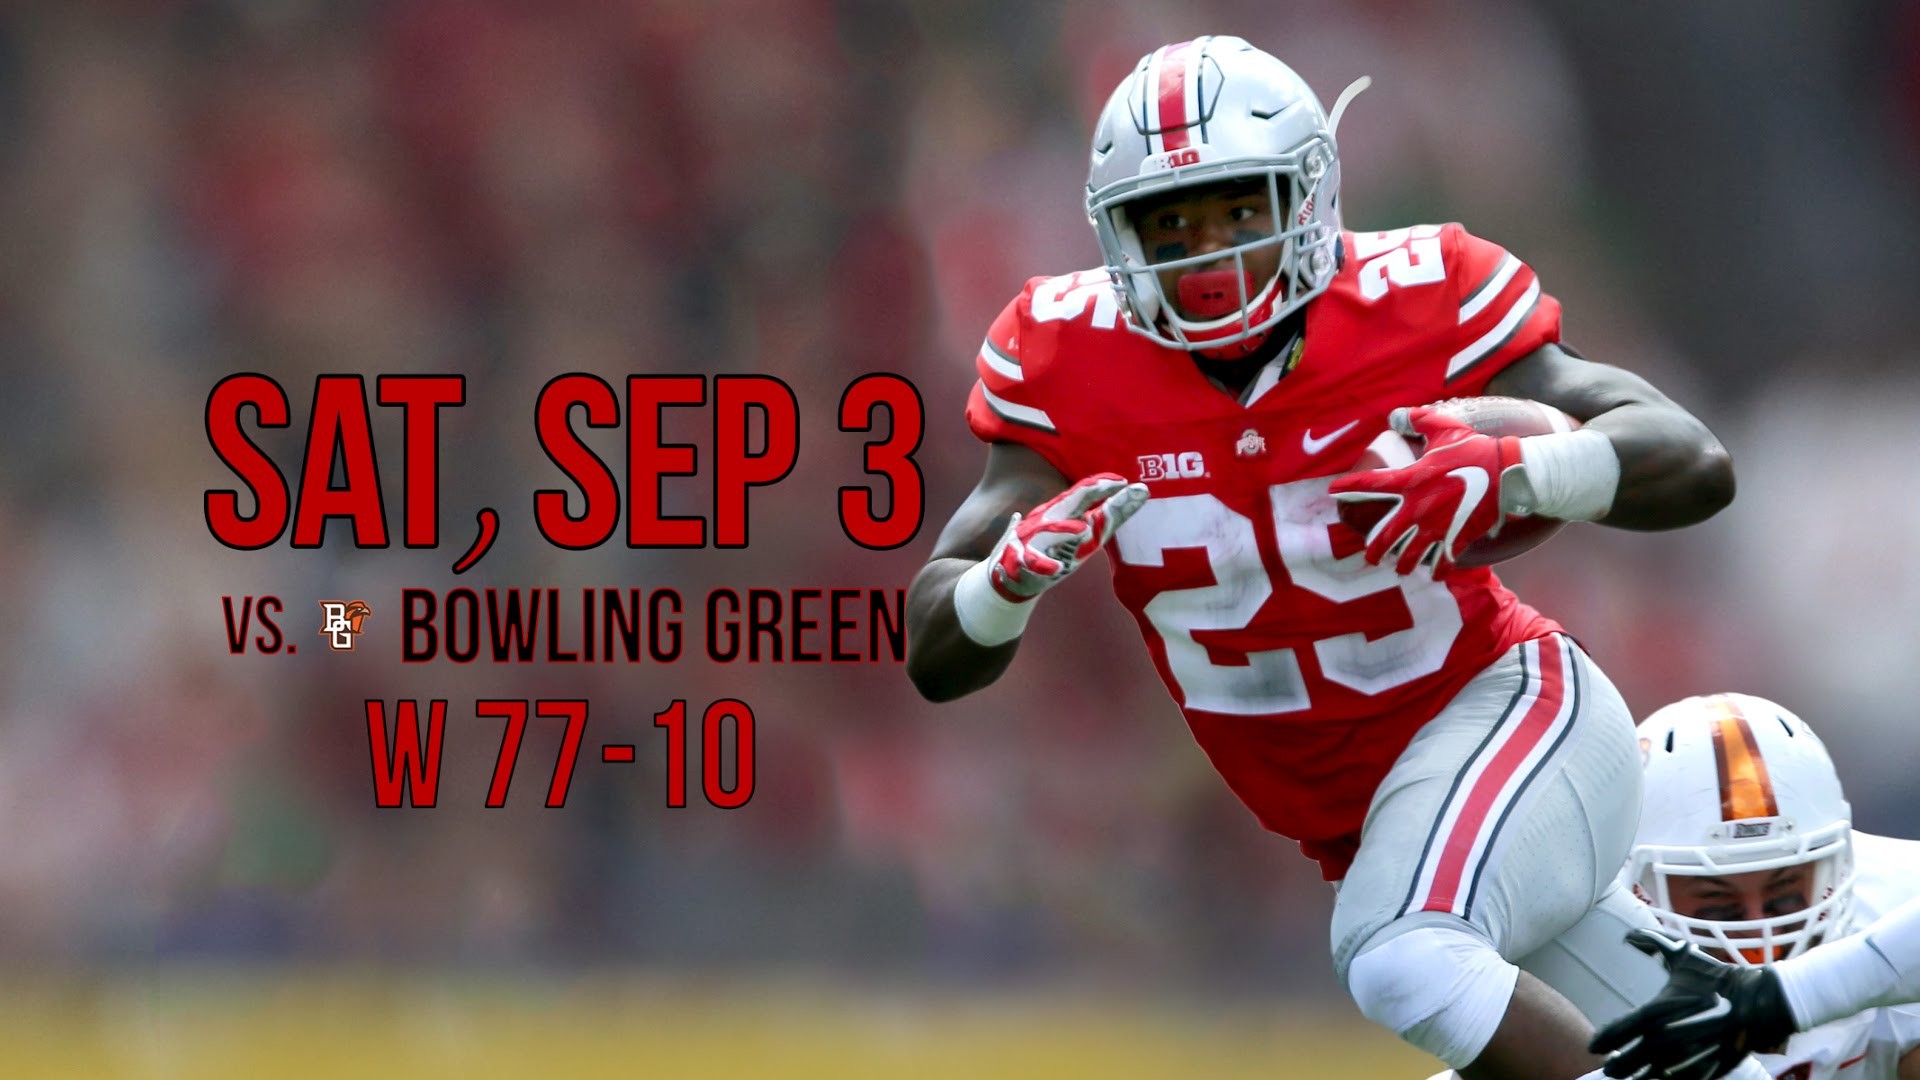 1920x1080 2016 Ohio State Buckeyes - Schedule & Scores (as of 9-12-16)